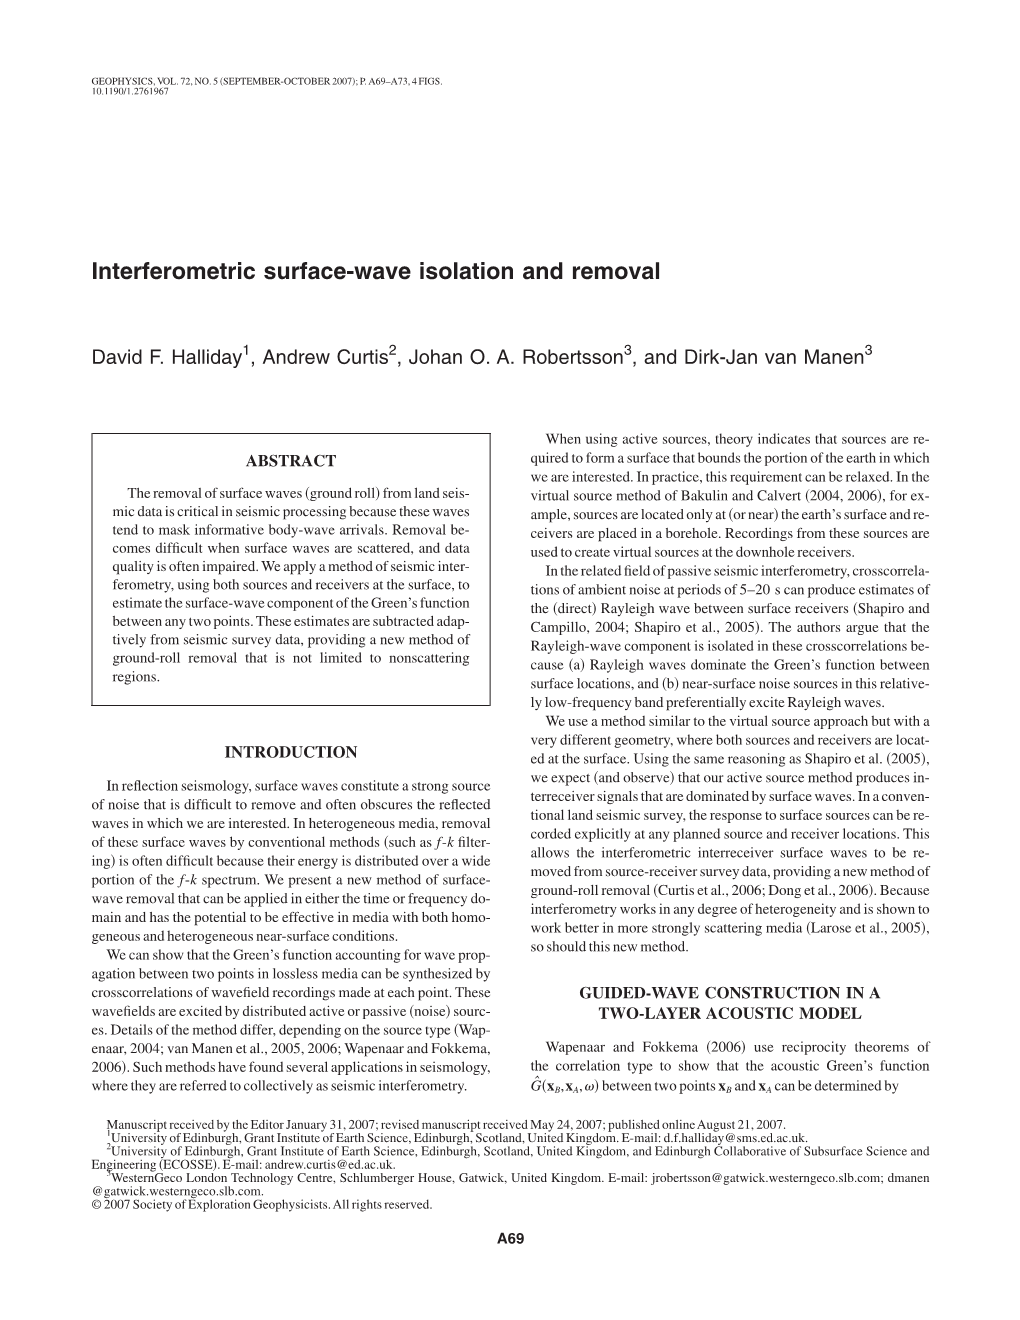 Interferometric Surface-Wave Isolation and Removal